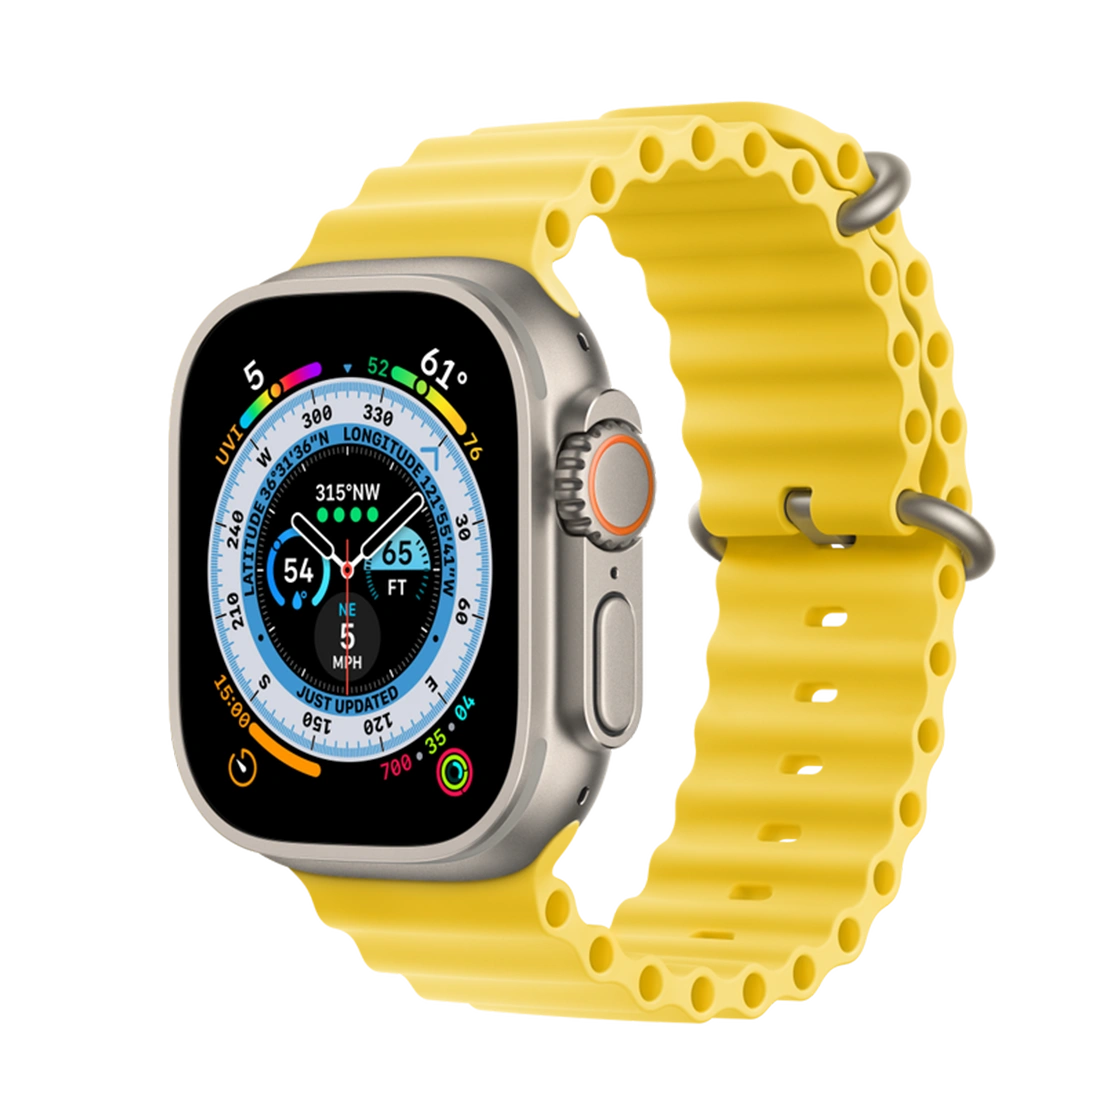 Apple Watch Ultra Titanium Case with Yellow Ocean Band